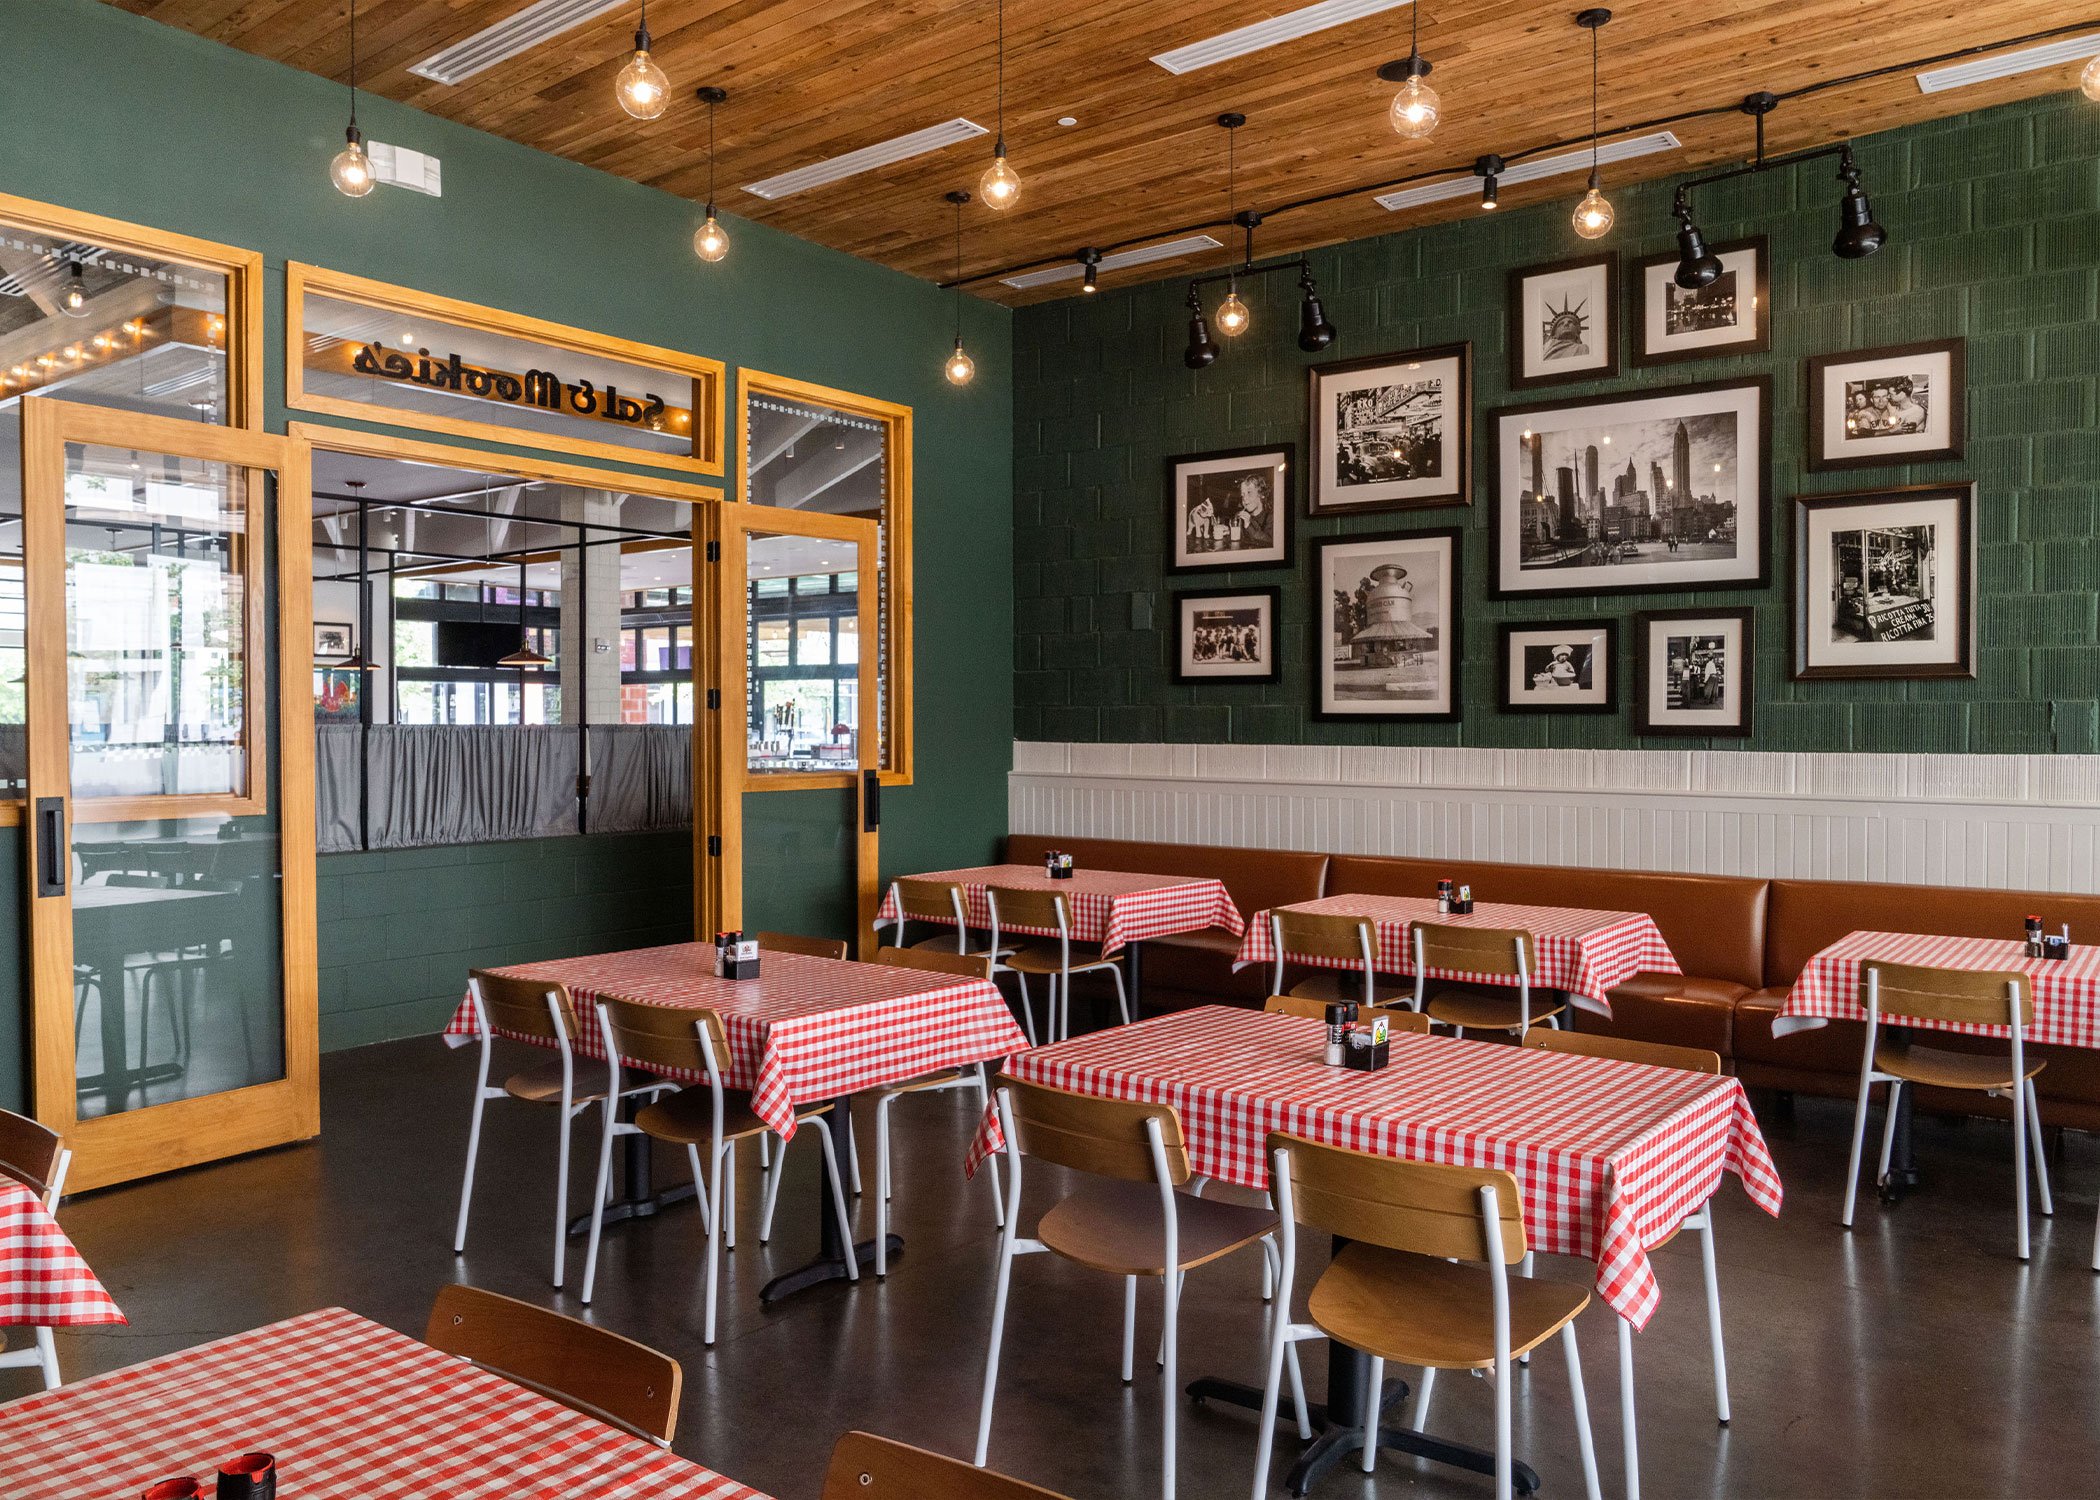 Restaurant interior with Sherman chairs at tables covered with classic red plaid table cloths. Green walls with warm natural wood details, framed black and white images on a gallery wall